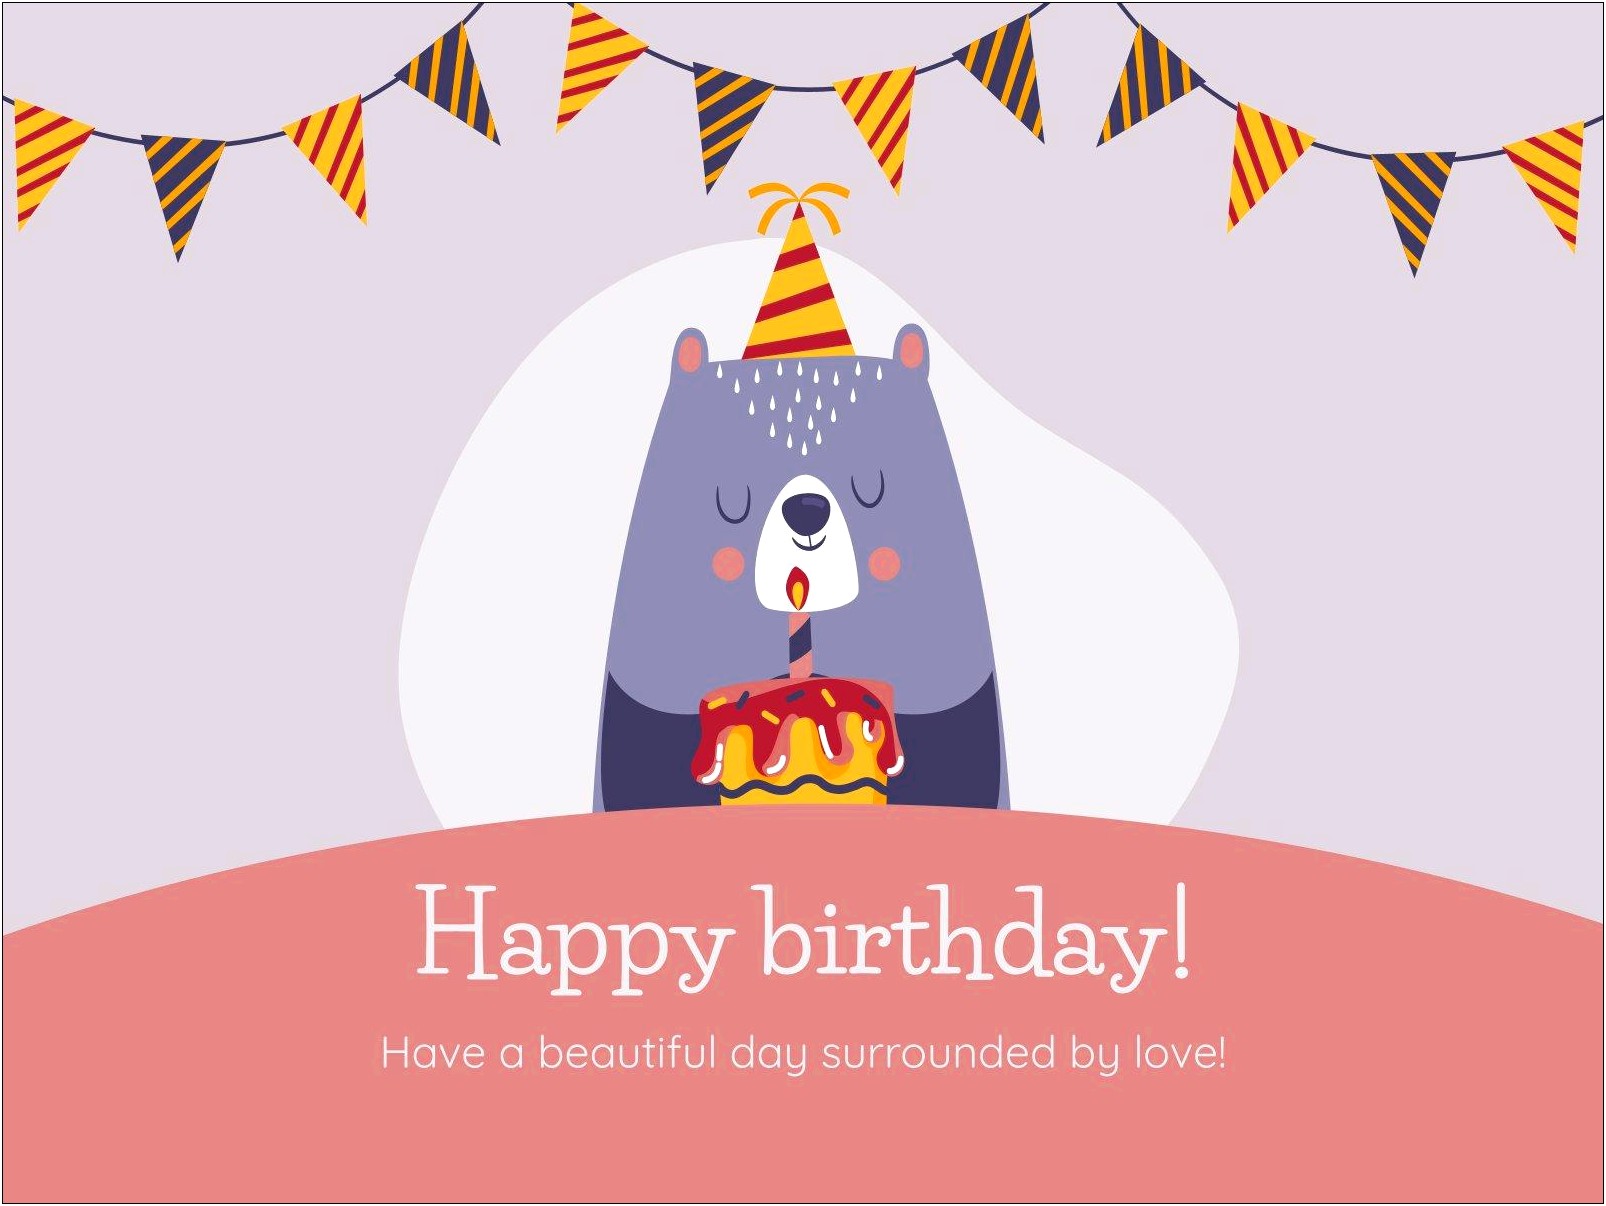 Corporate Birthday Card Template Free Download